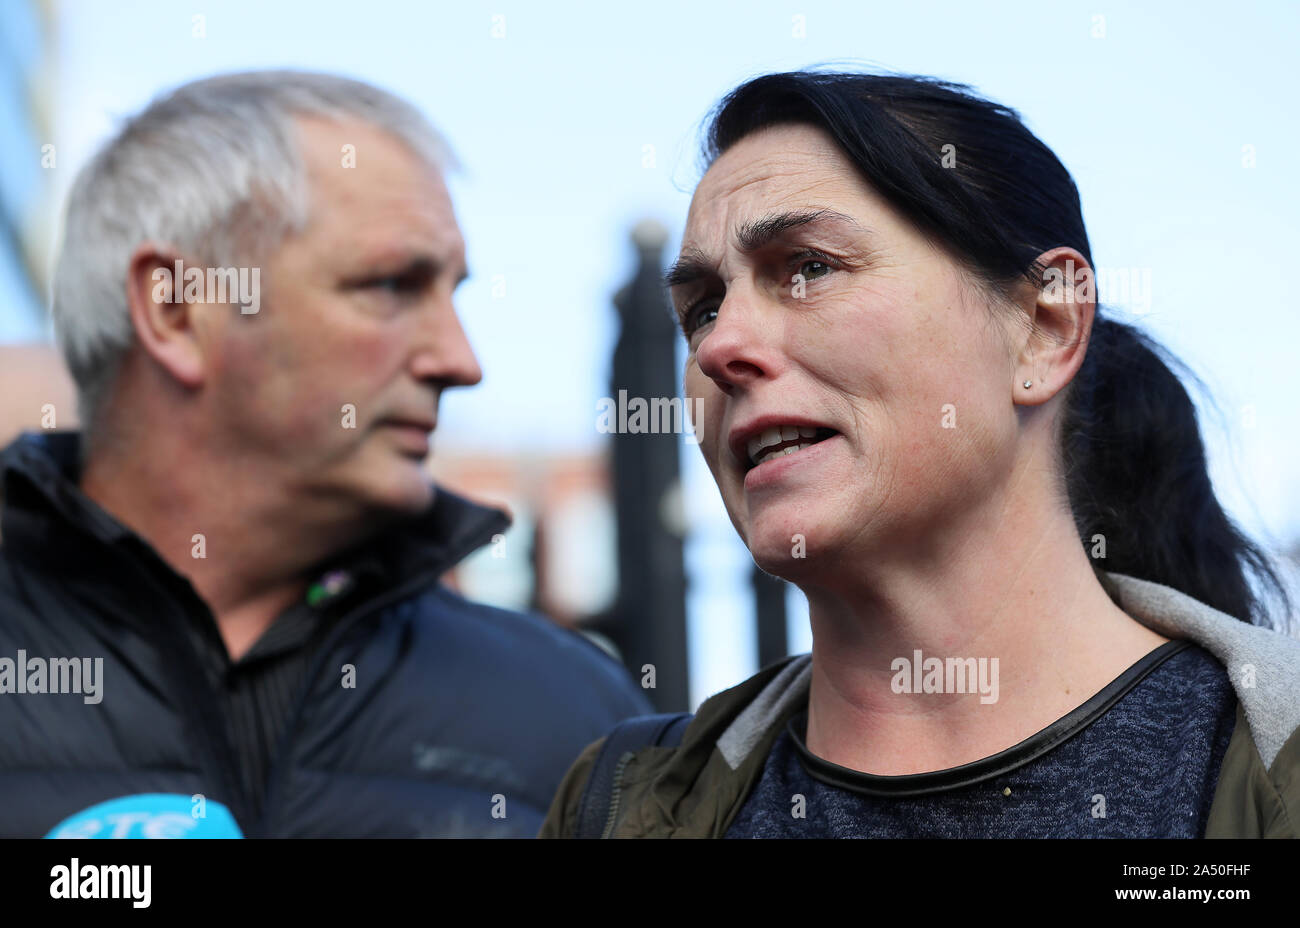 IRA murder victim Jean McConville's daughter Susie and son Michael outside  Belfast Crown Court following the trial of the facts into two charges of  soliciting the murder of Jean McConville against veteran